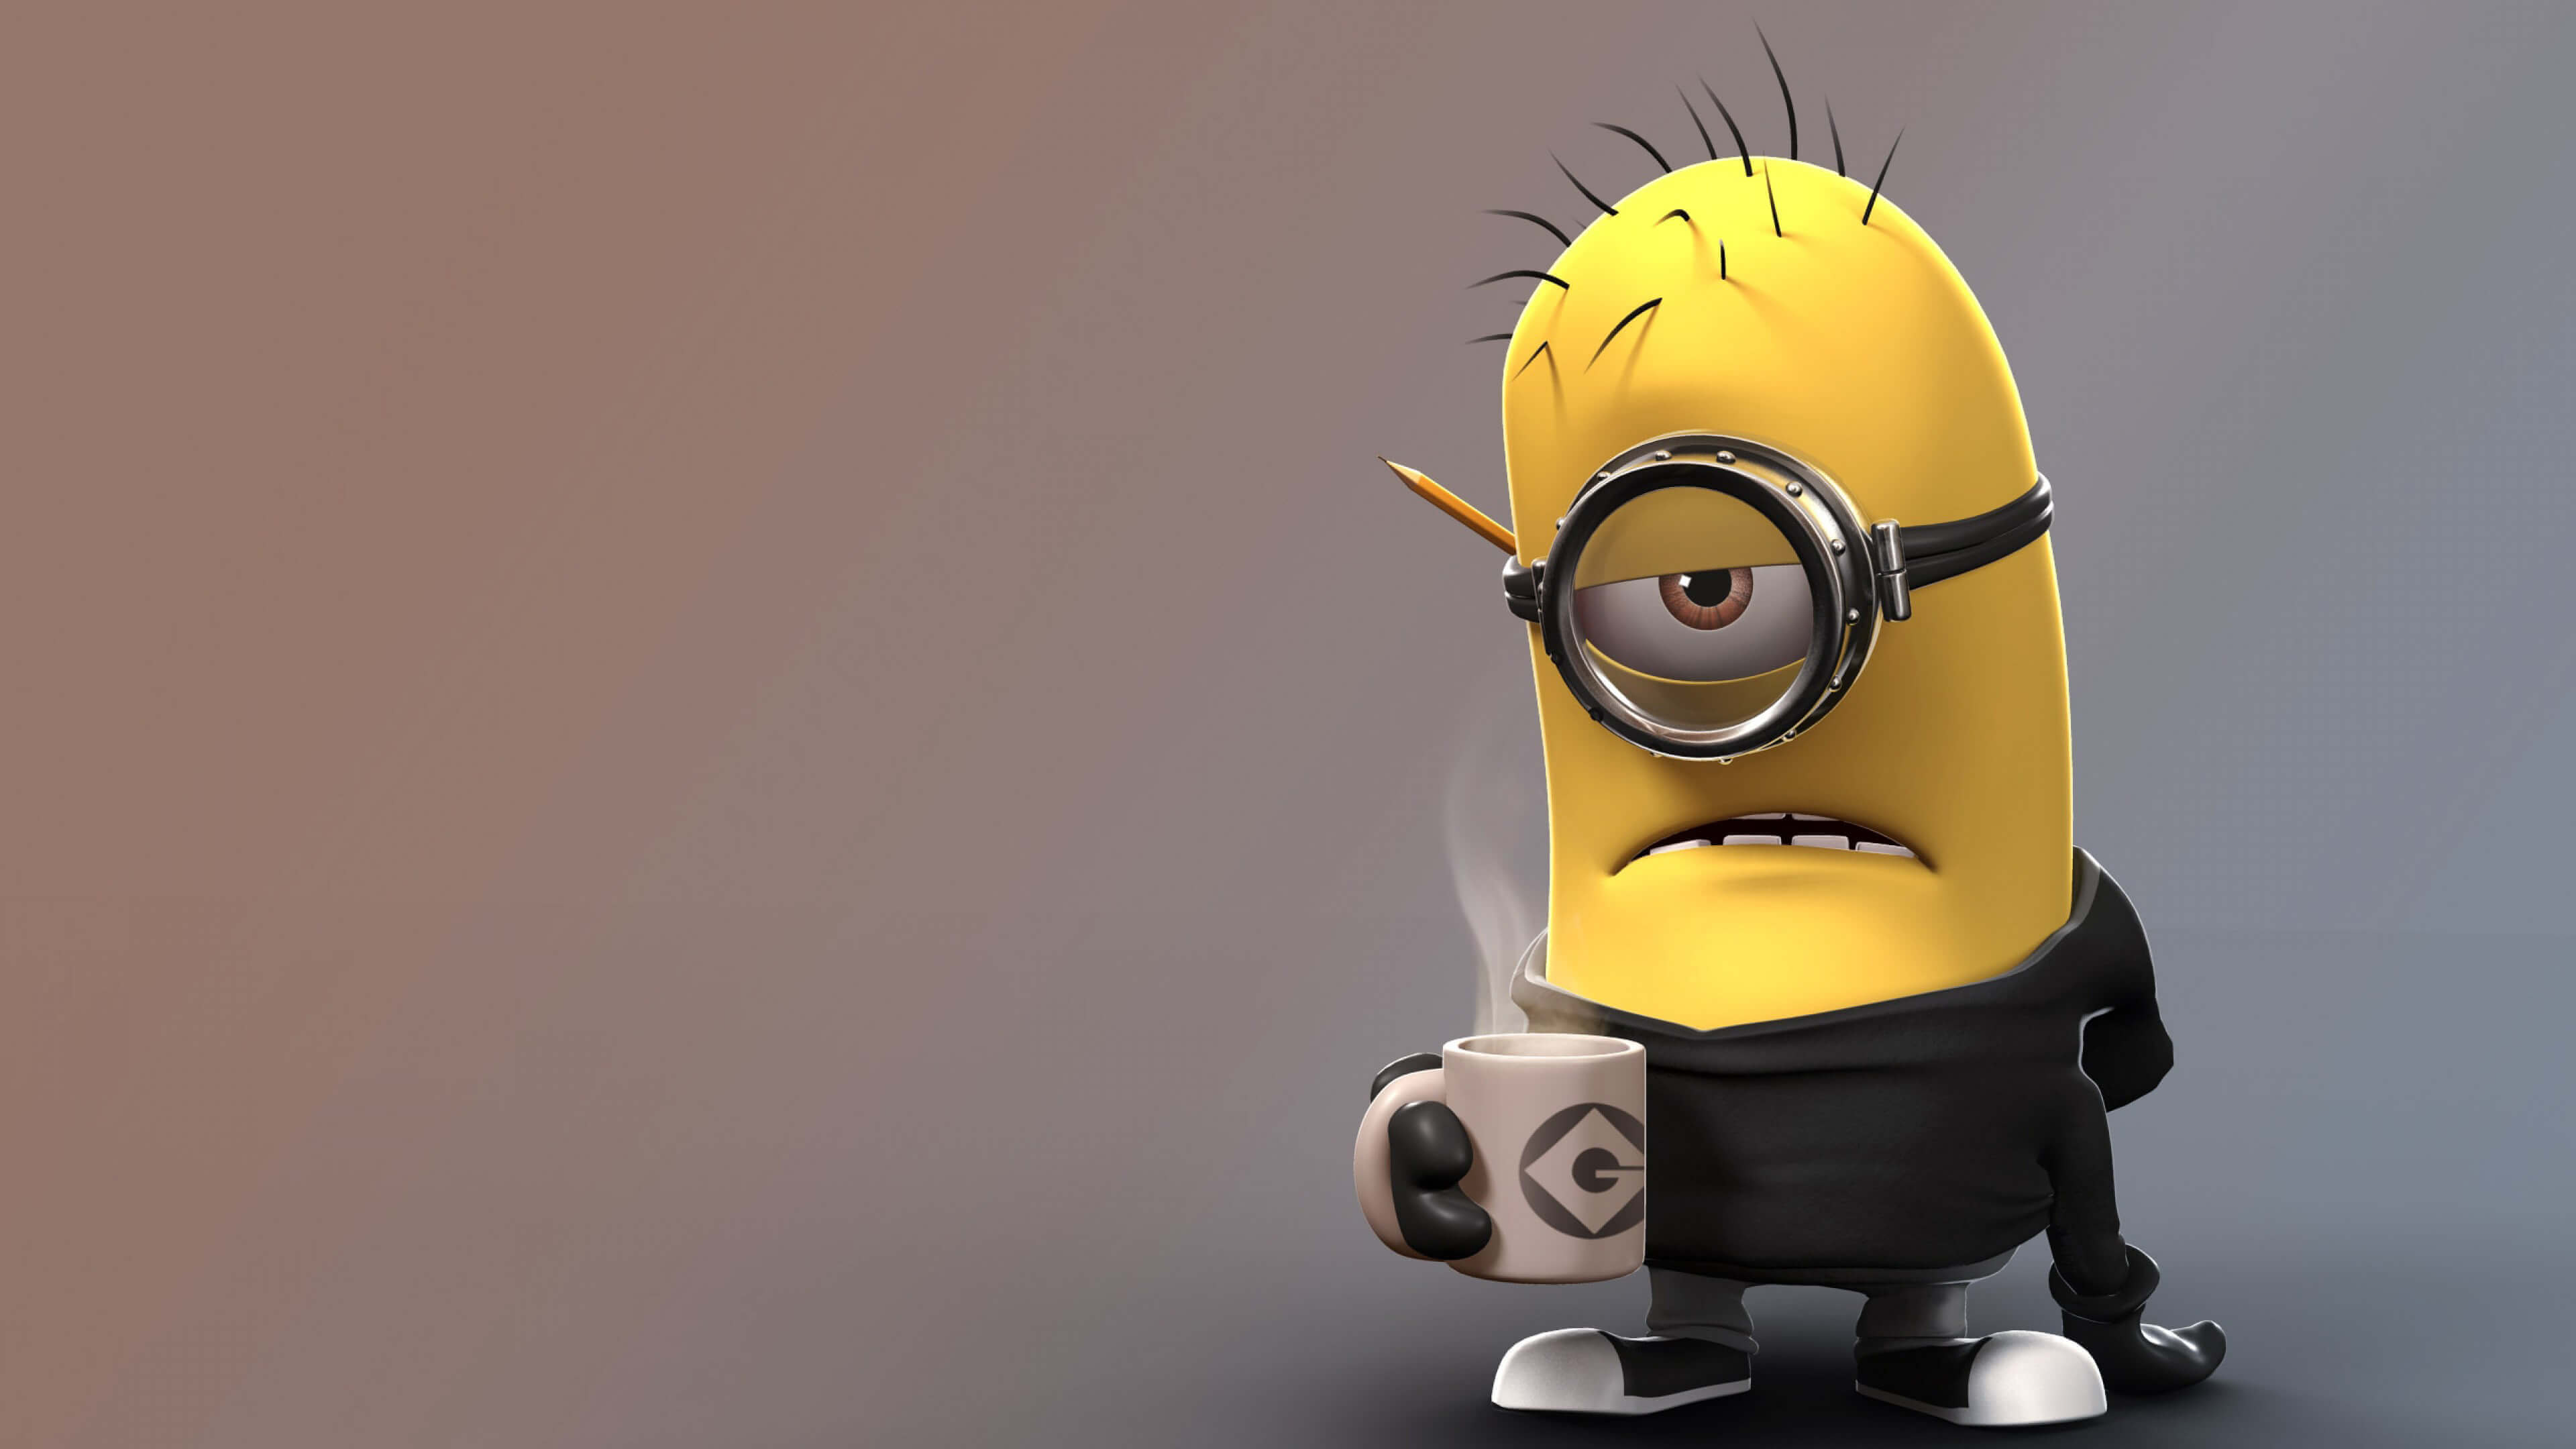 Despicable Me Angry Minion Hd Cartoons 4k Wallpapers Images